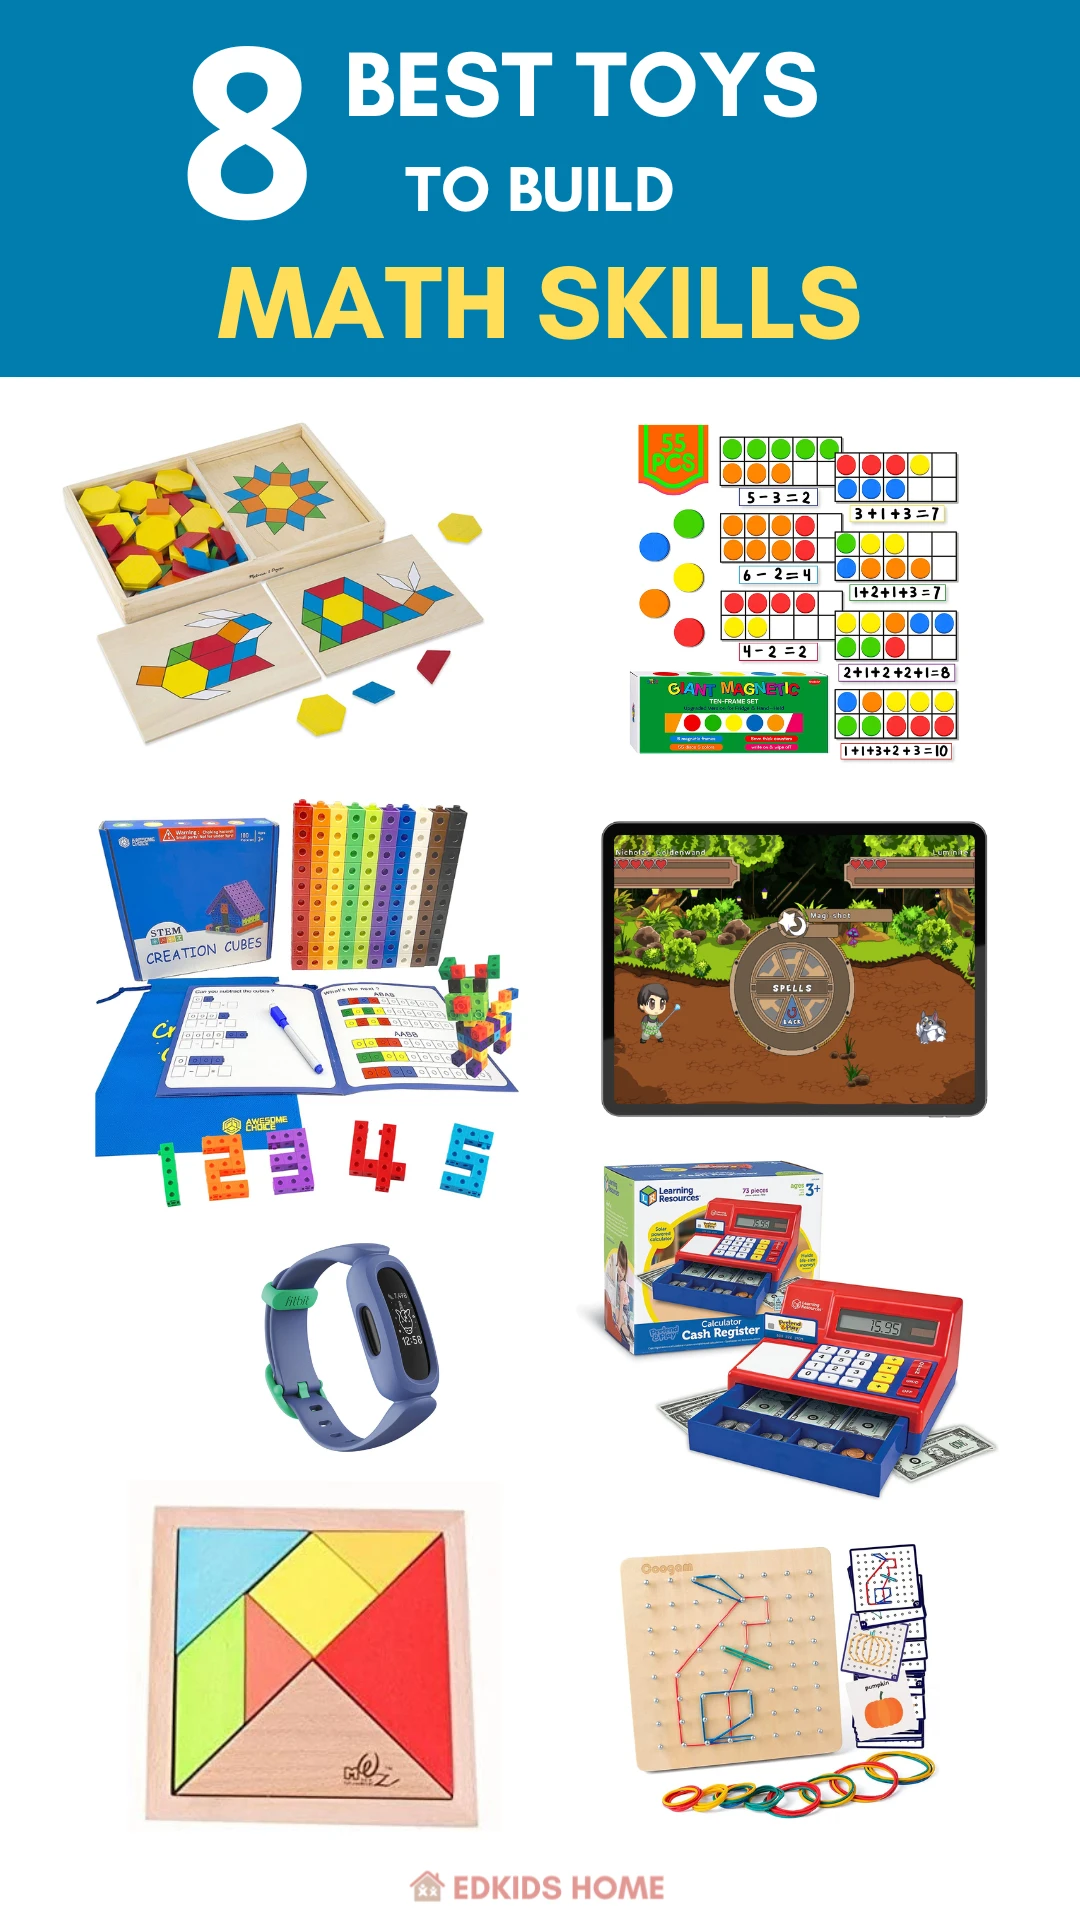 8 Best Toys to Build Math Skills